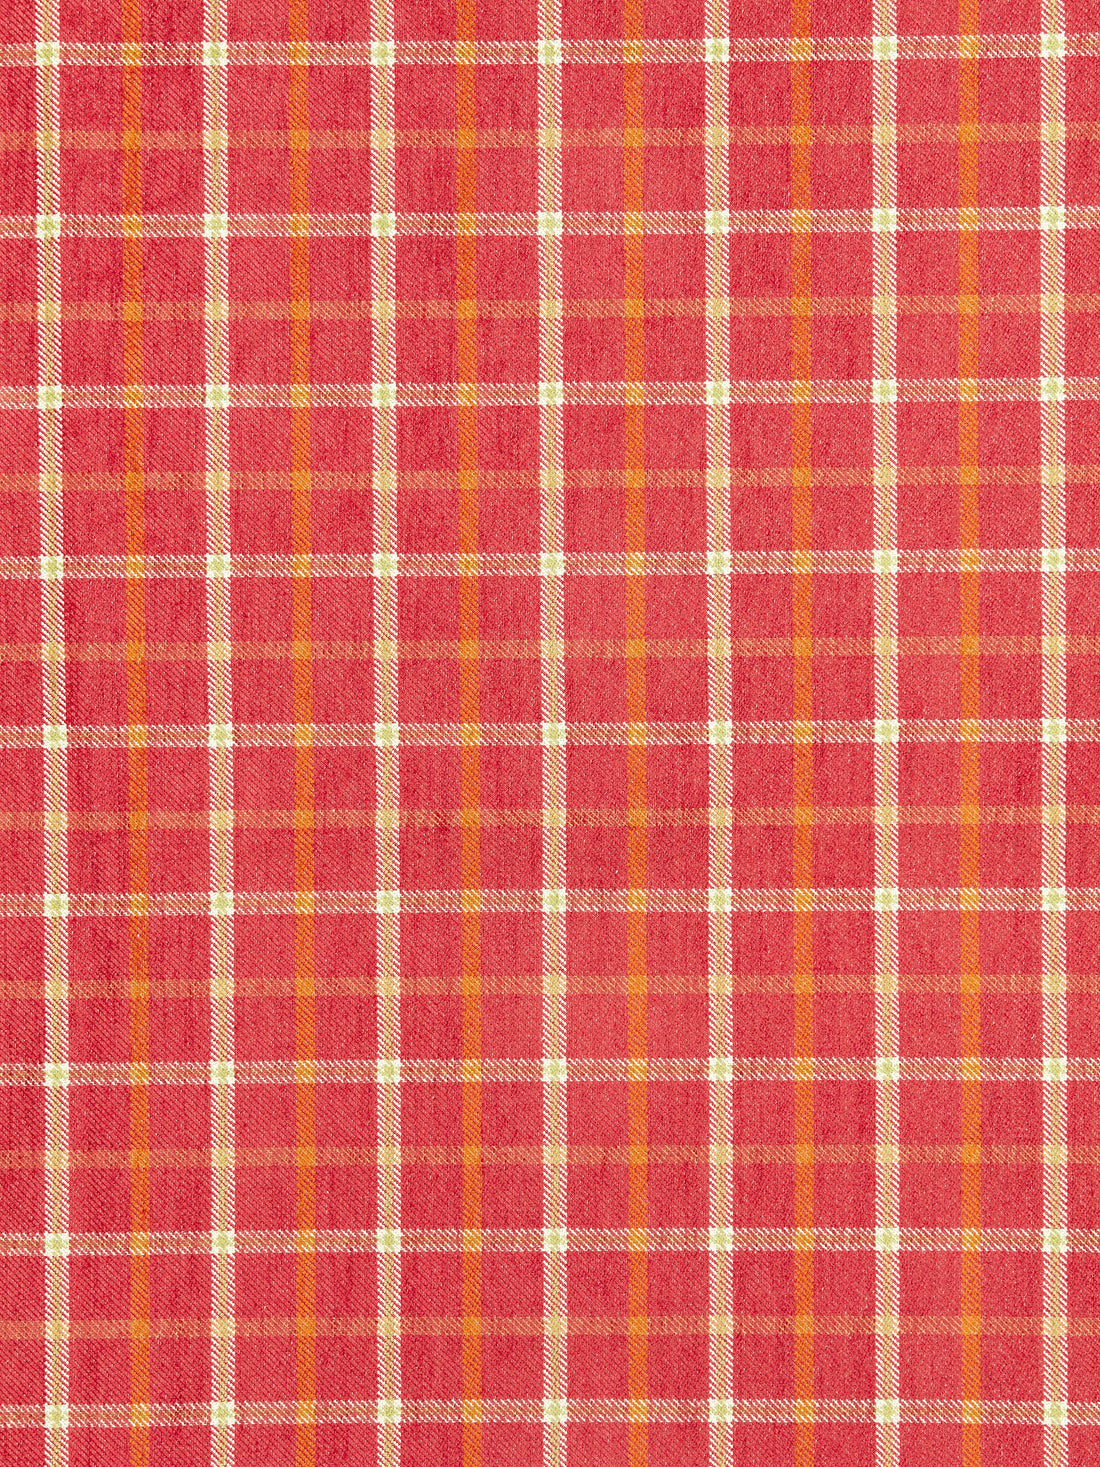 Bristol Plaid fabric in tuscan color - pattern number SC 000327121 - by Scalamandre in the Scalamandre Fabrics Book 1 collection